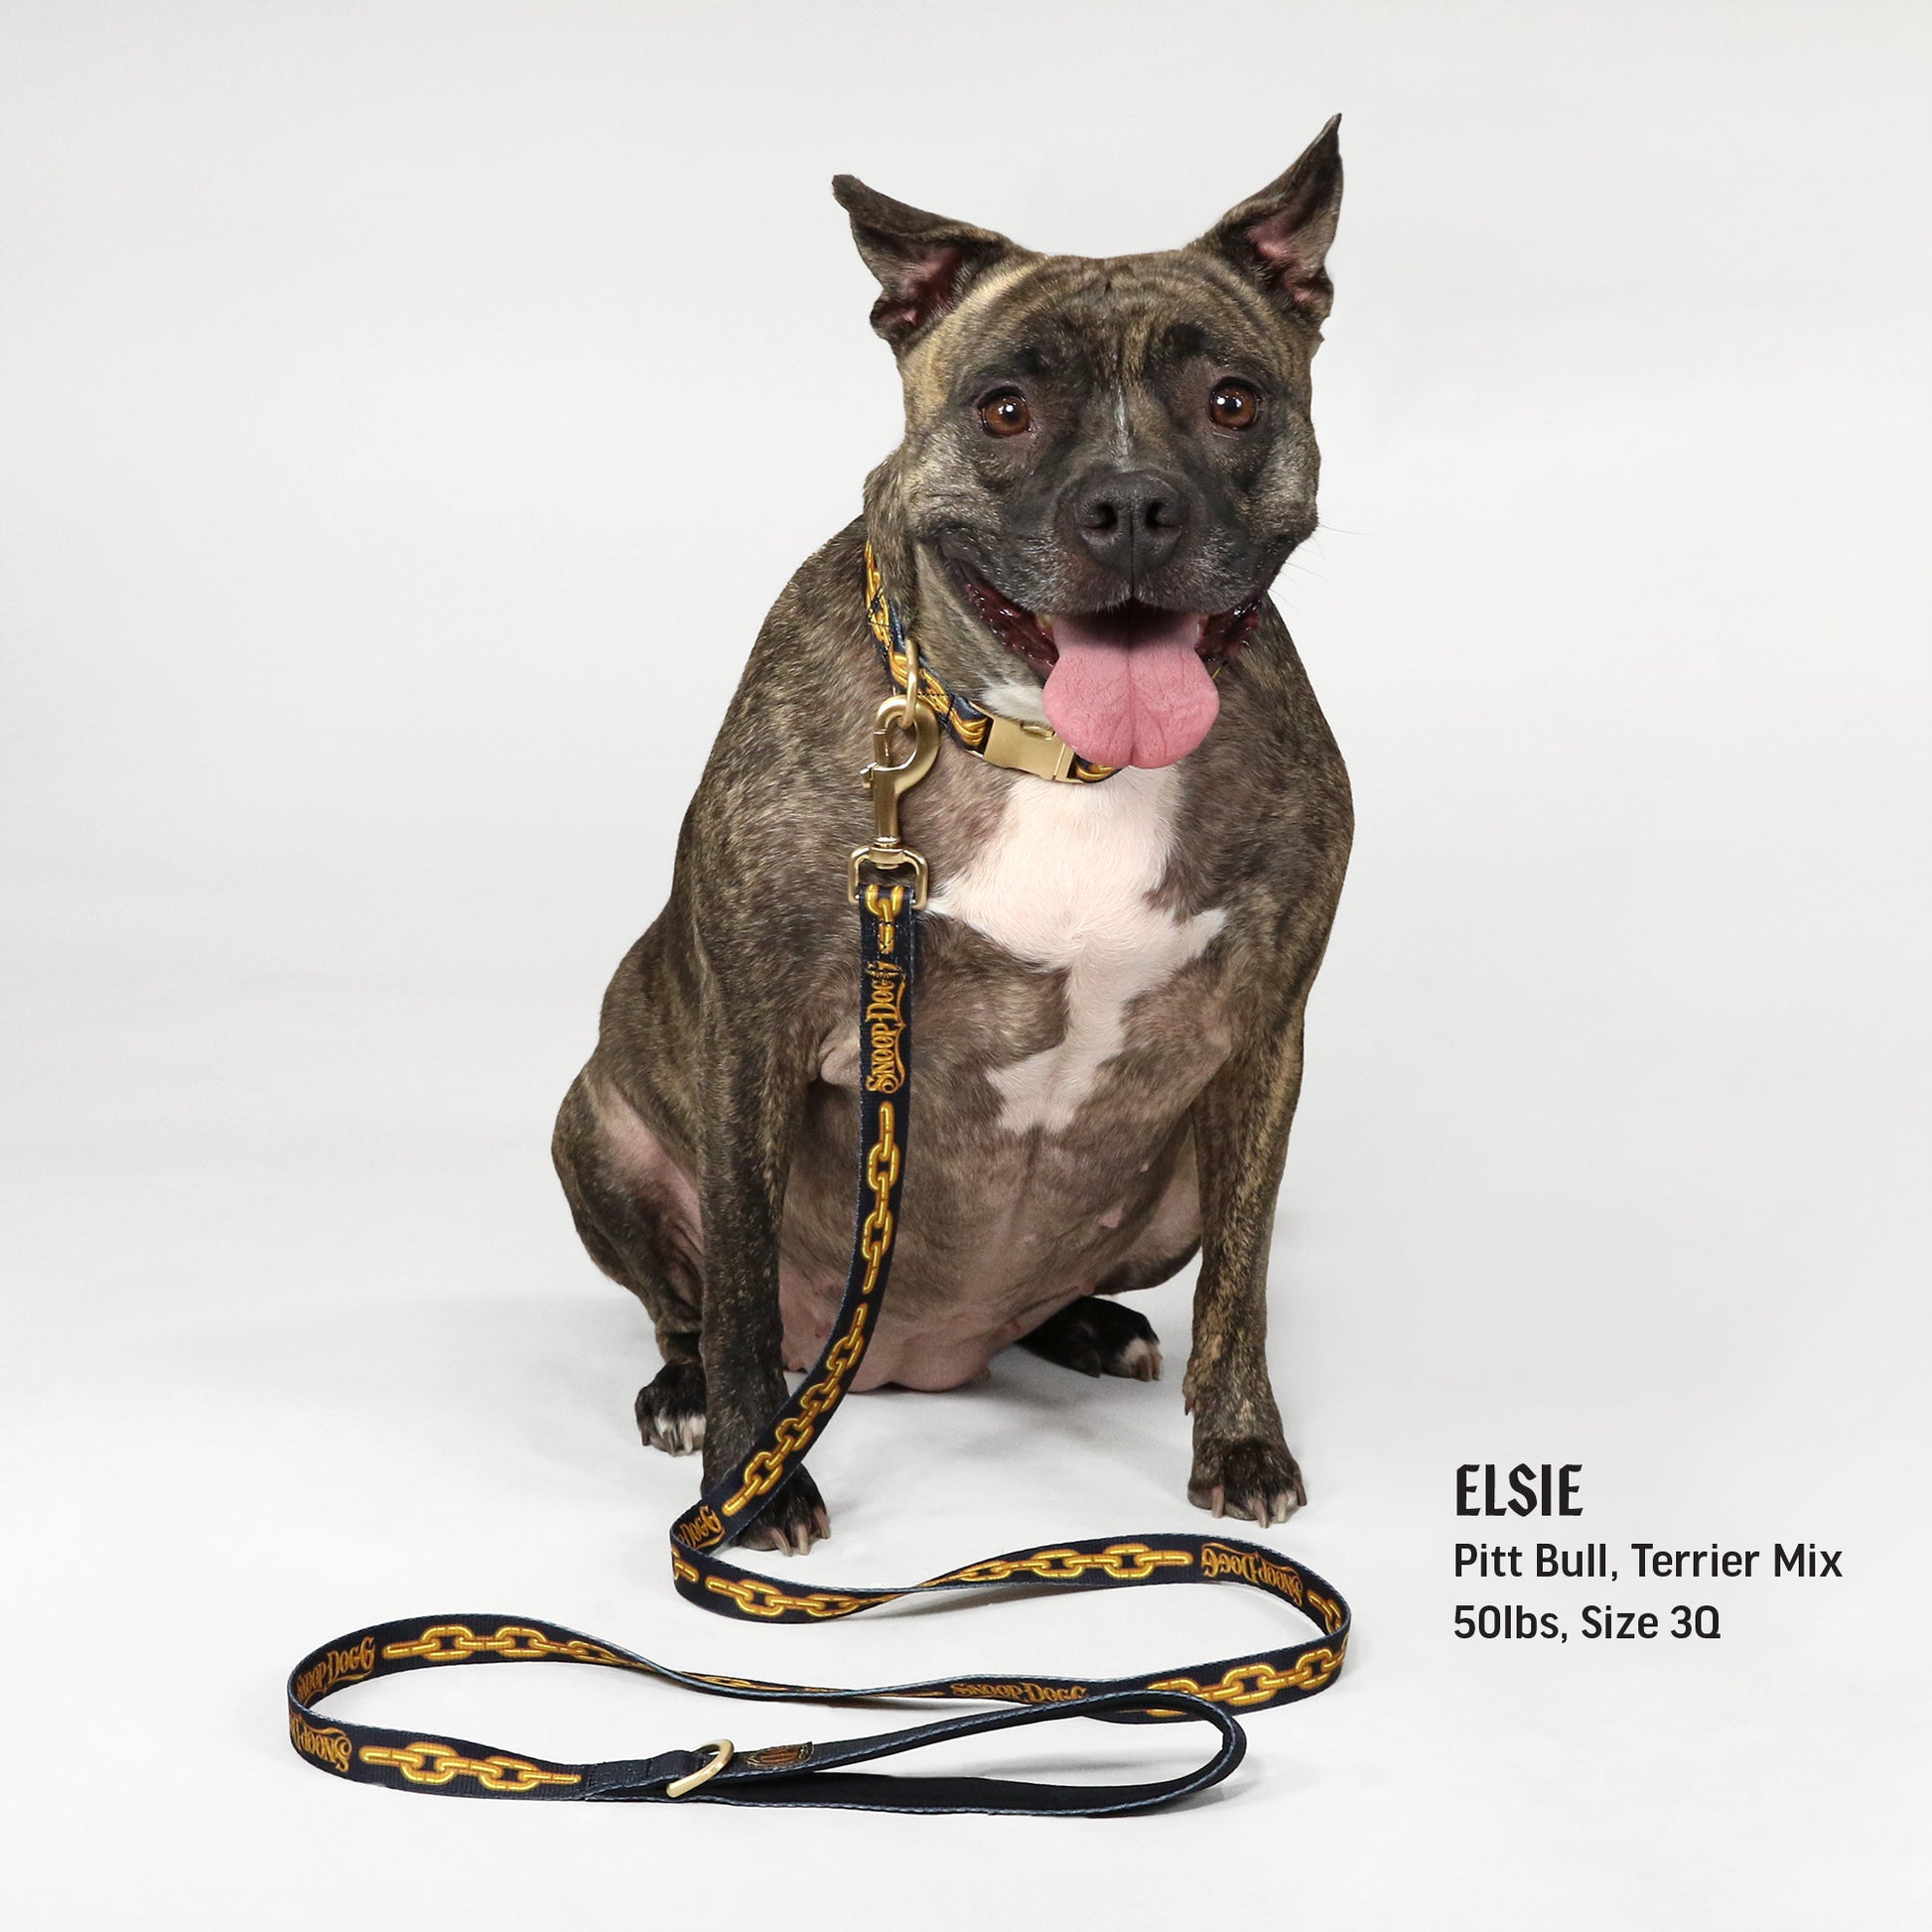 Elsie the Pitt Bull, Terrier Mix wearing the Off The Chain Deluxe Pet Lead in size 3Q.